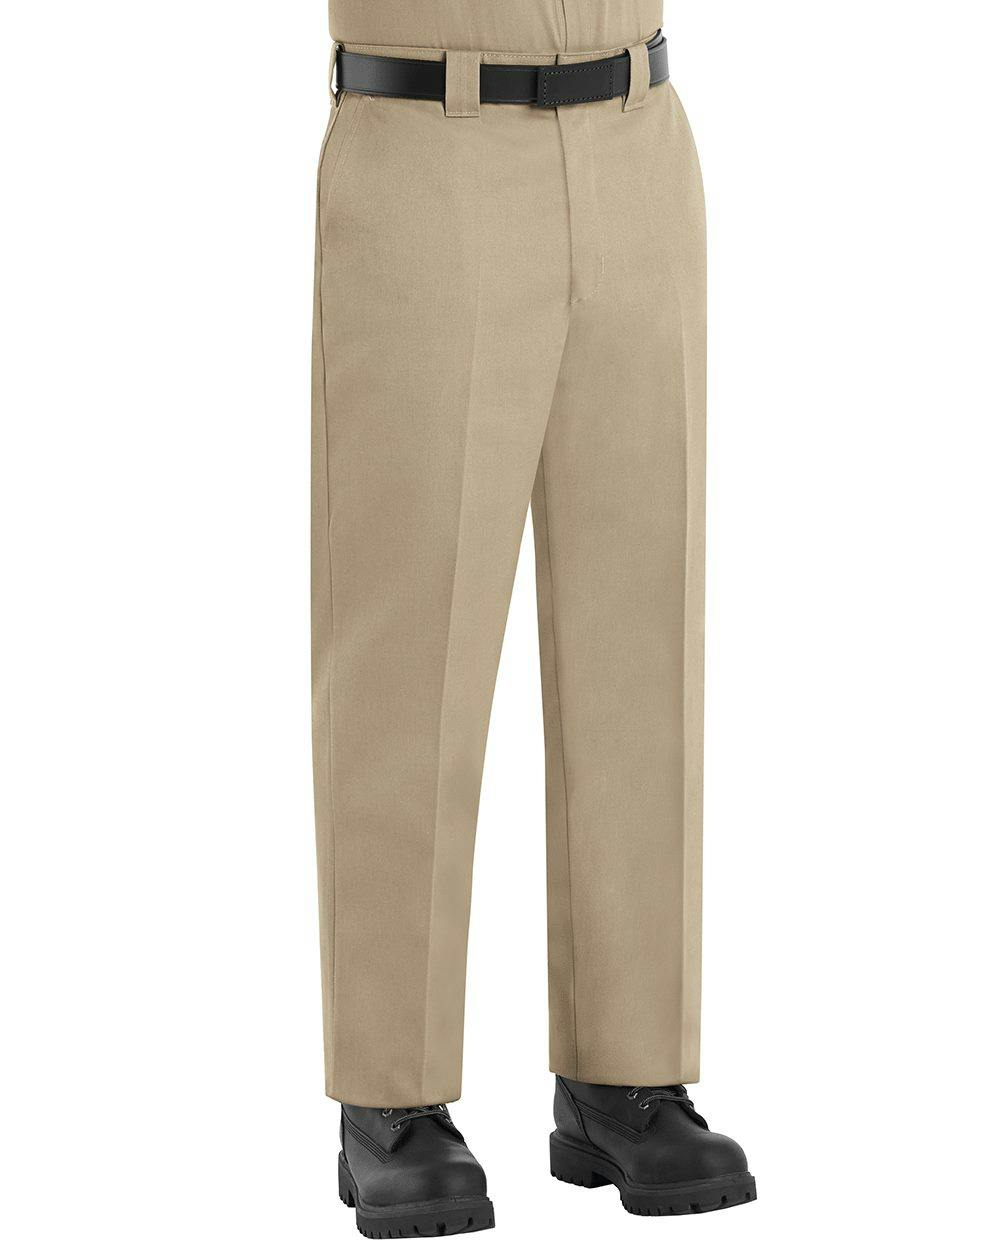 Image for Utility Work Pants - PT62